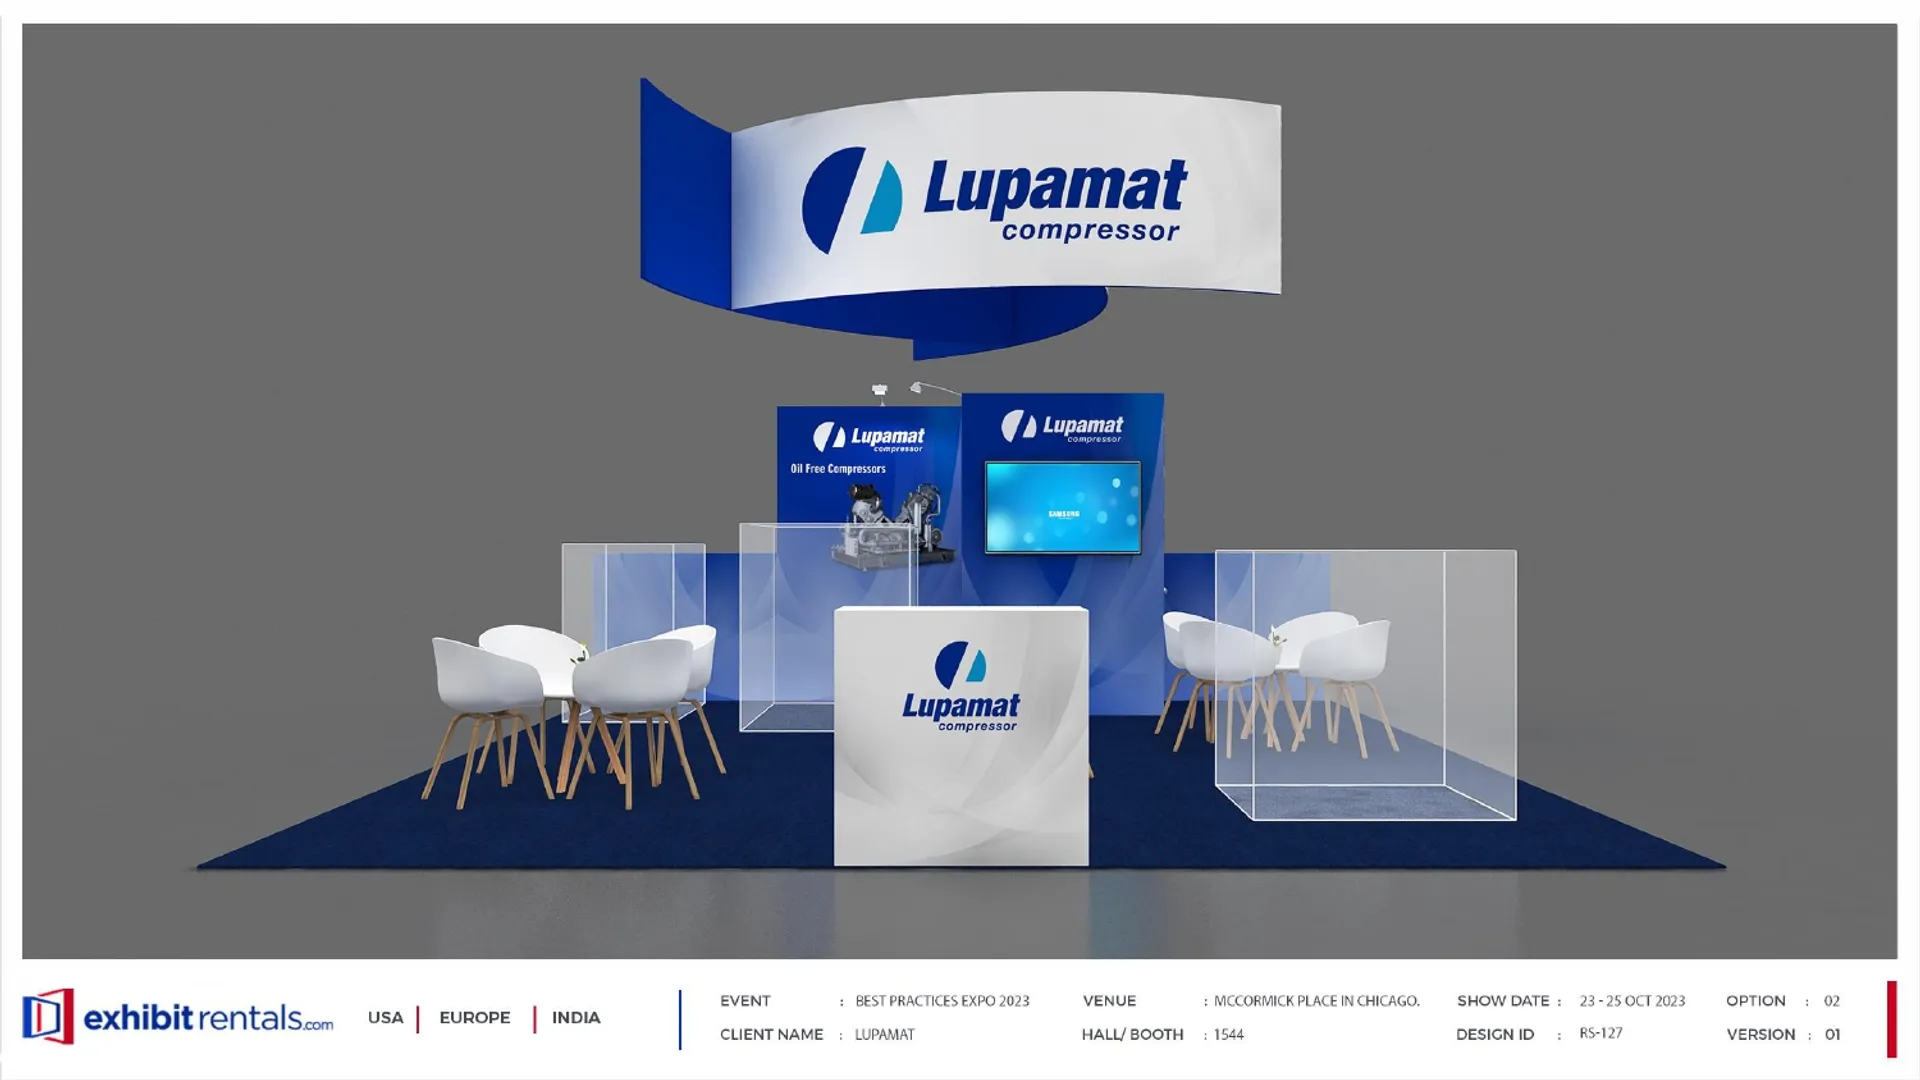 booth-design-projects/Exhibit-Rentals/2024-04-18-40x40-PENINSULA-Project-99/2.1_Lupamat_Best practices expo_ER design proposal-13_page-0001-cid47j.jpg